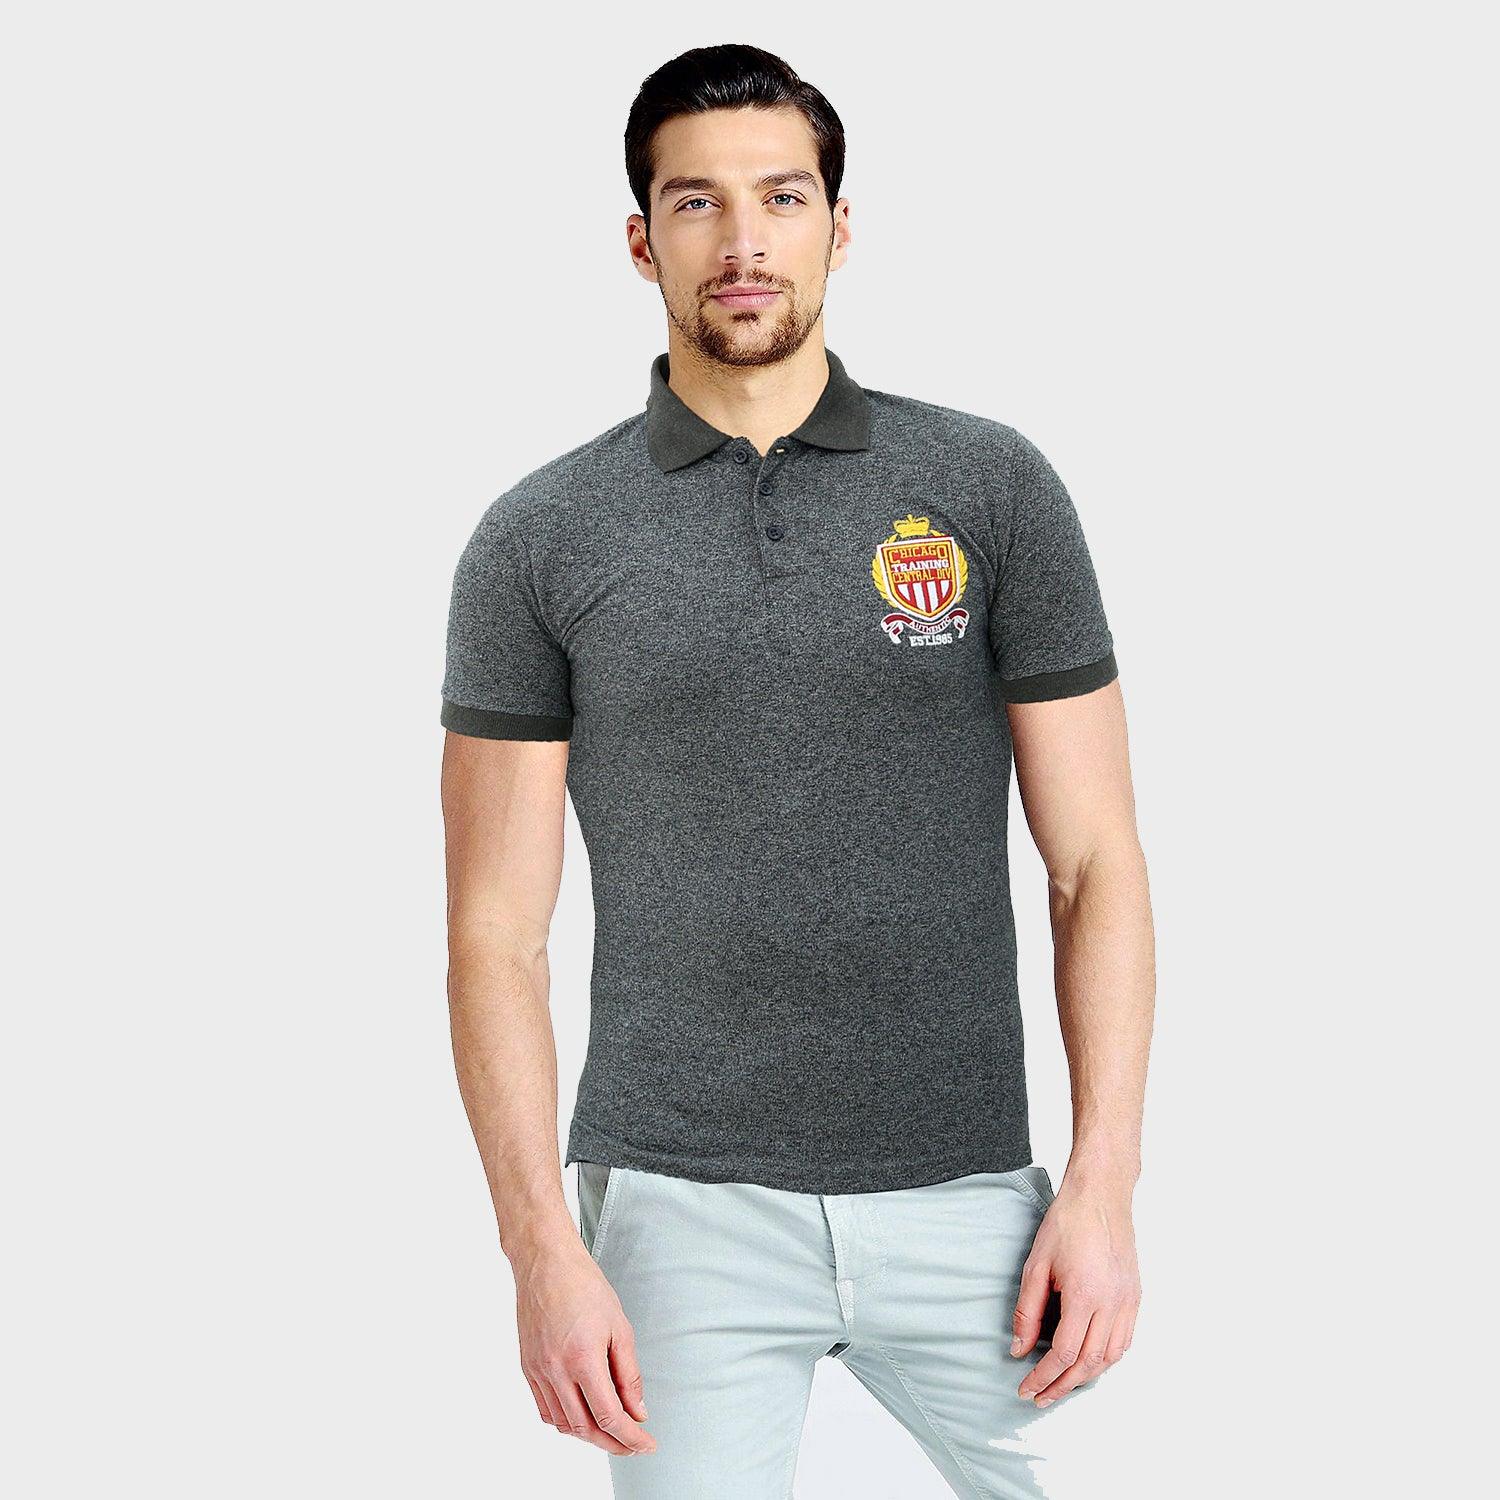 Mens Premium Quality Slim Fit Embellished Embroidered Pique Polo Shirt (CR-11240) - Brands River